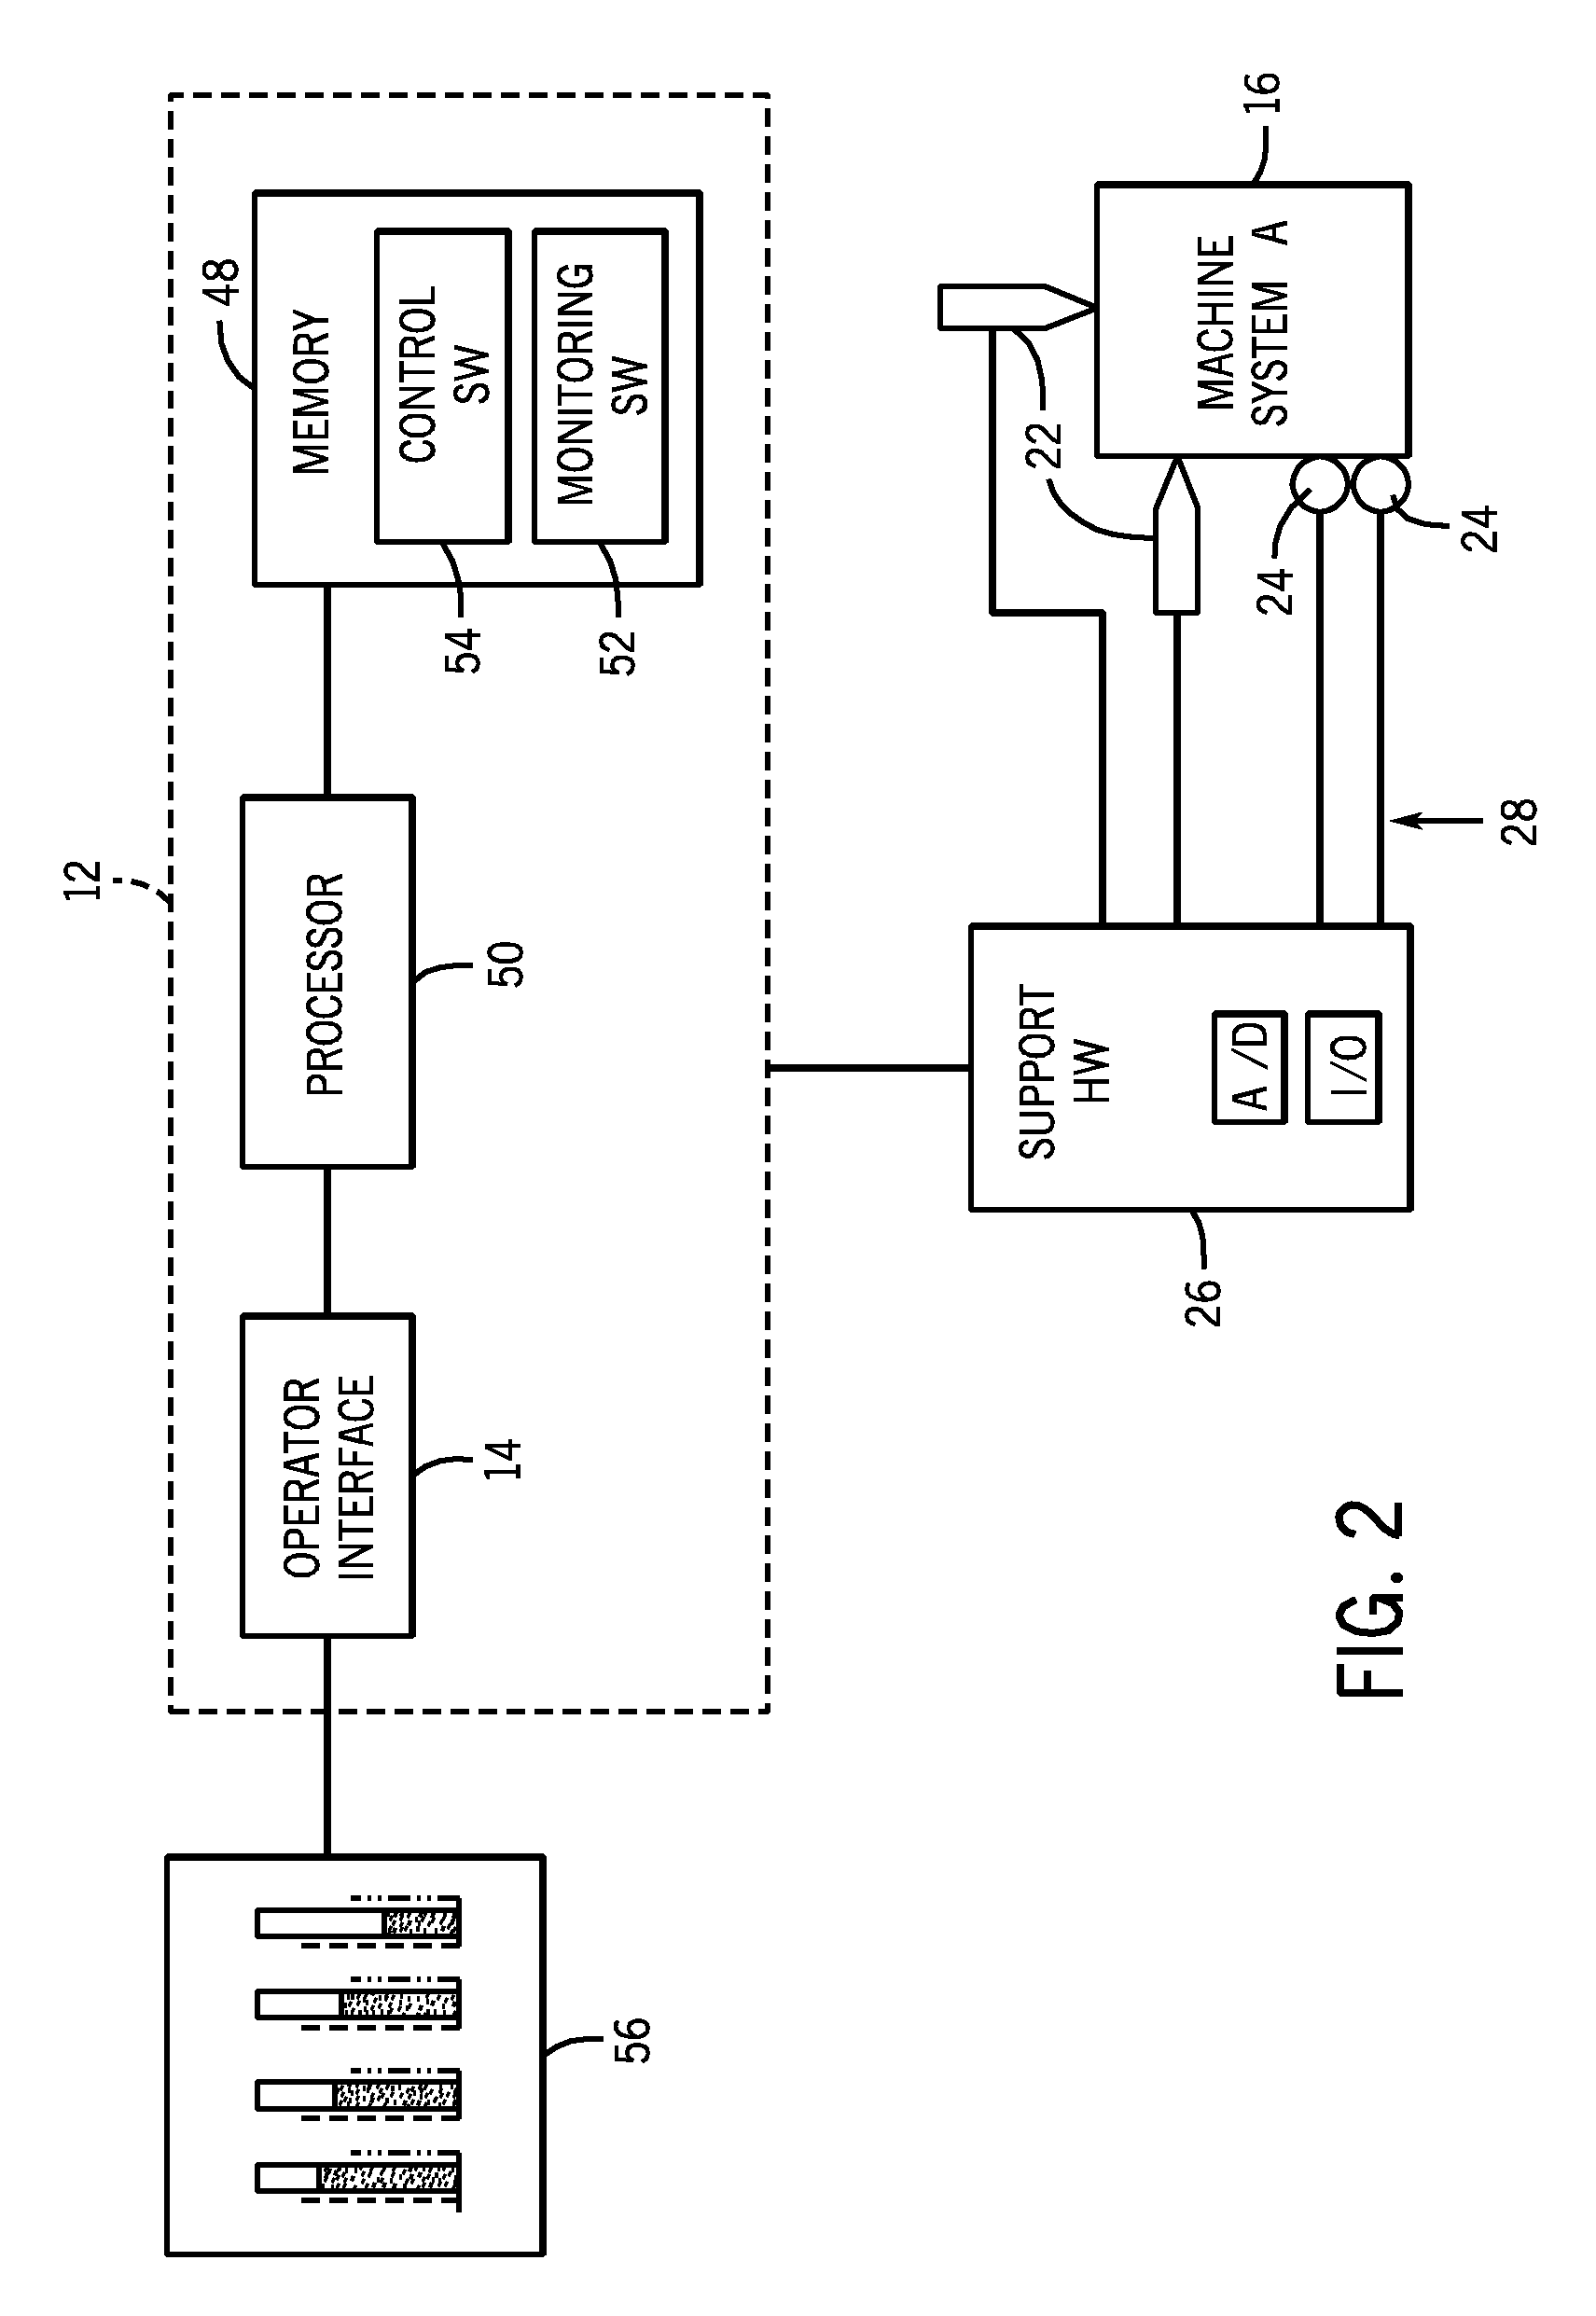 Modular condition monitoring integration for control systems